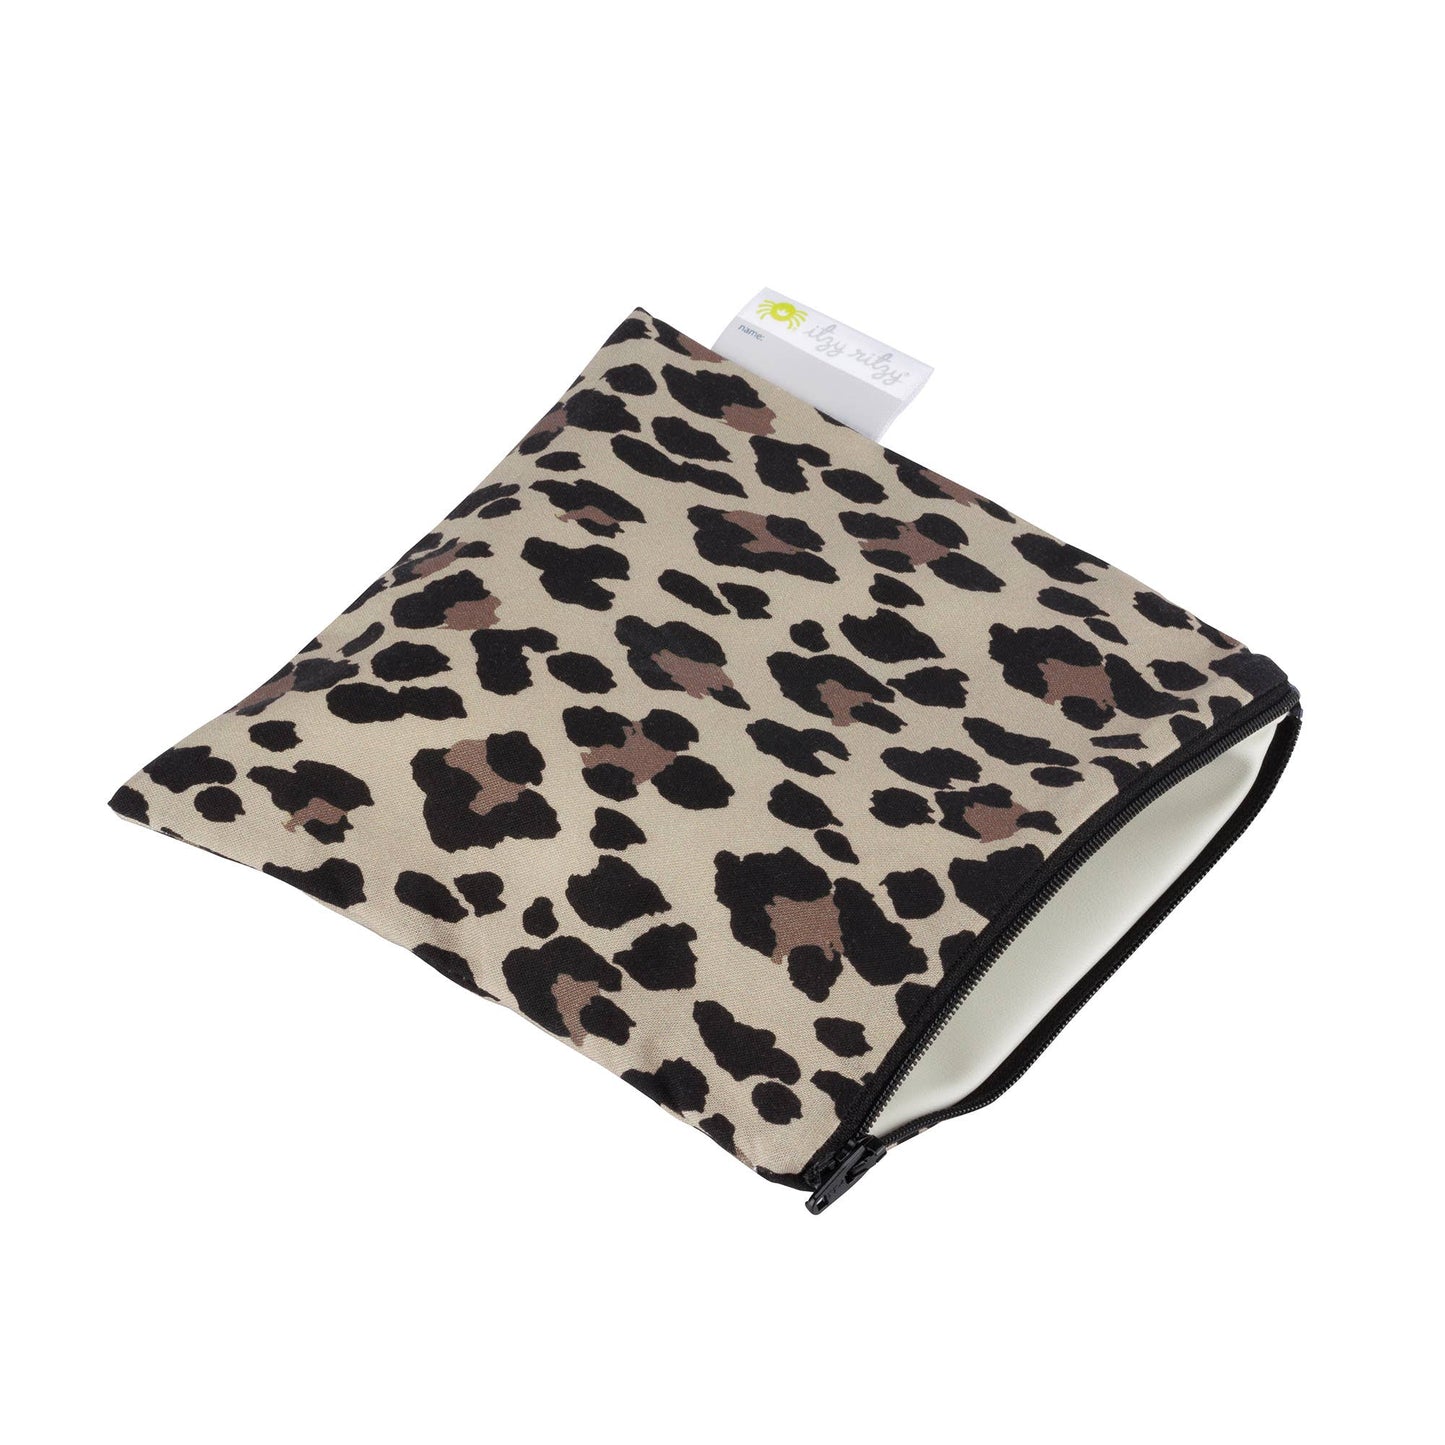 Reusable Snack & Everything Bags- Leopard